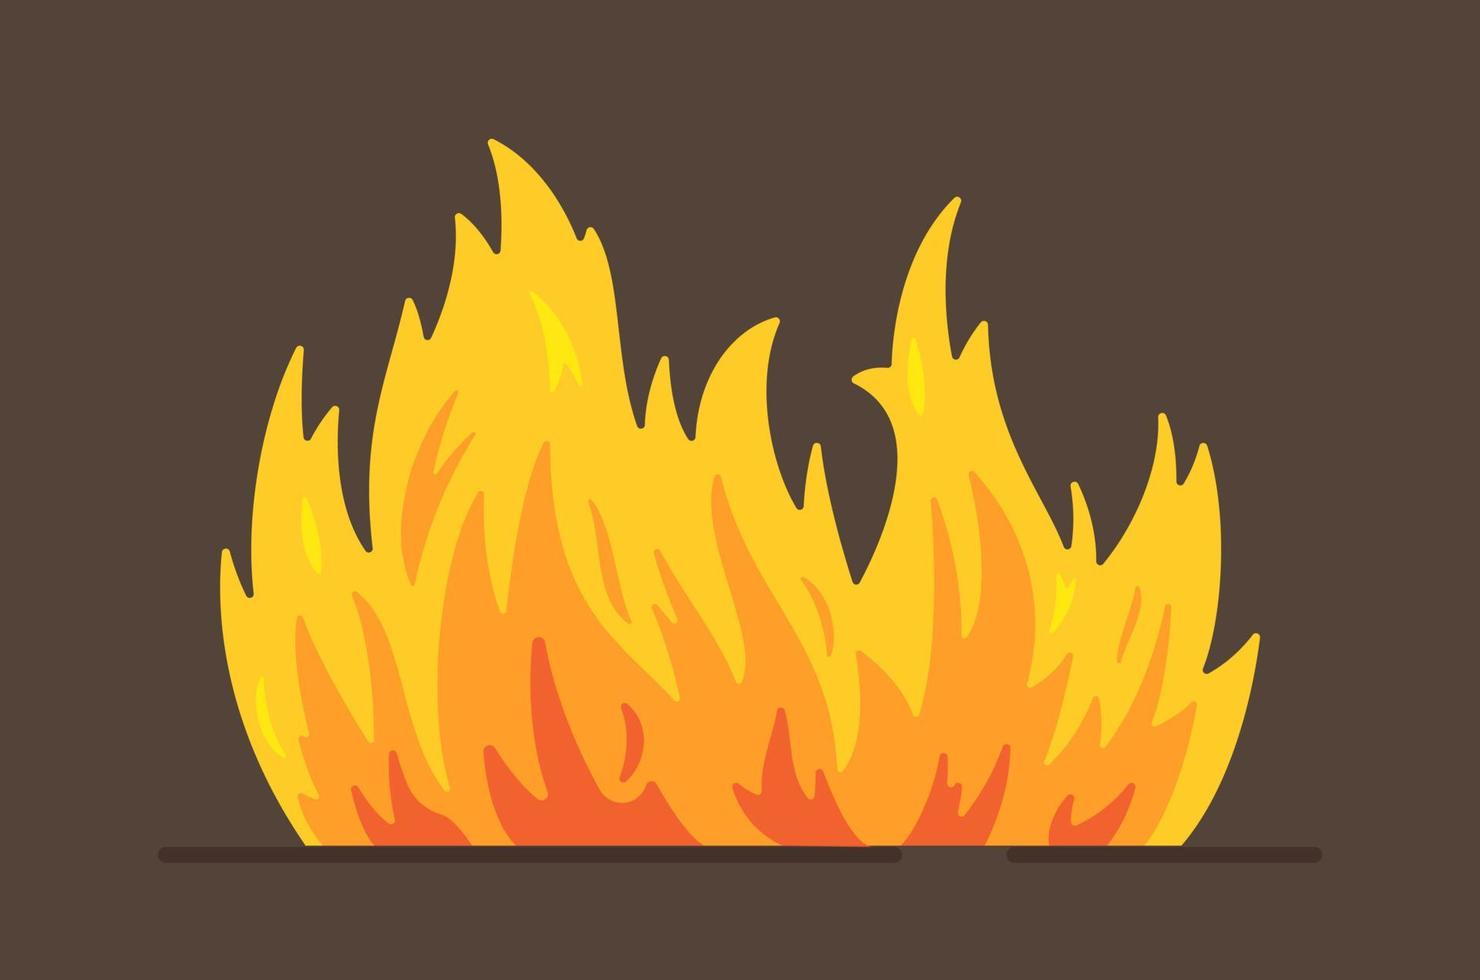 Flames engulfing and destroying something. Hot picture. vector